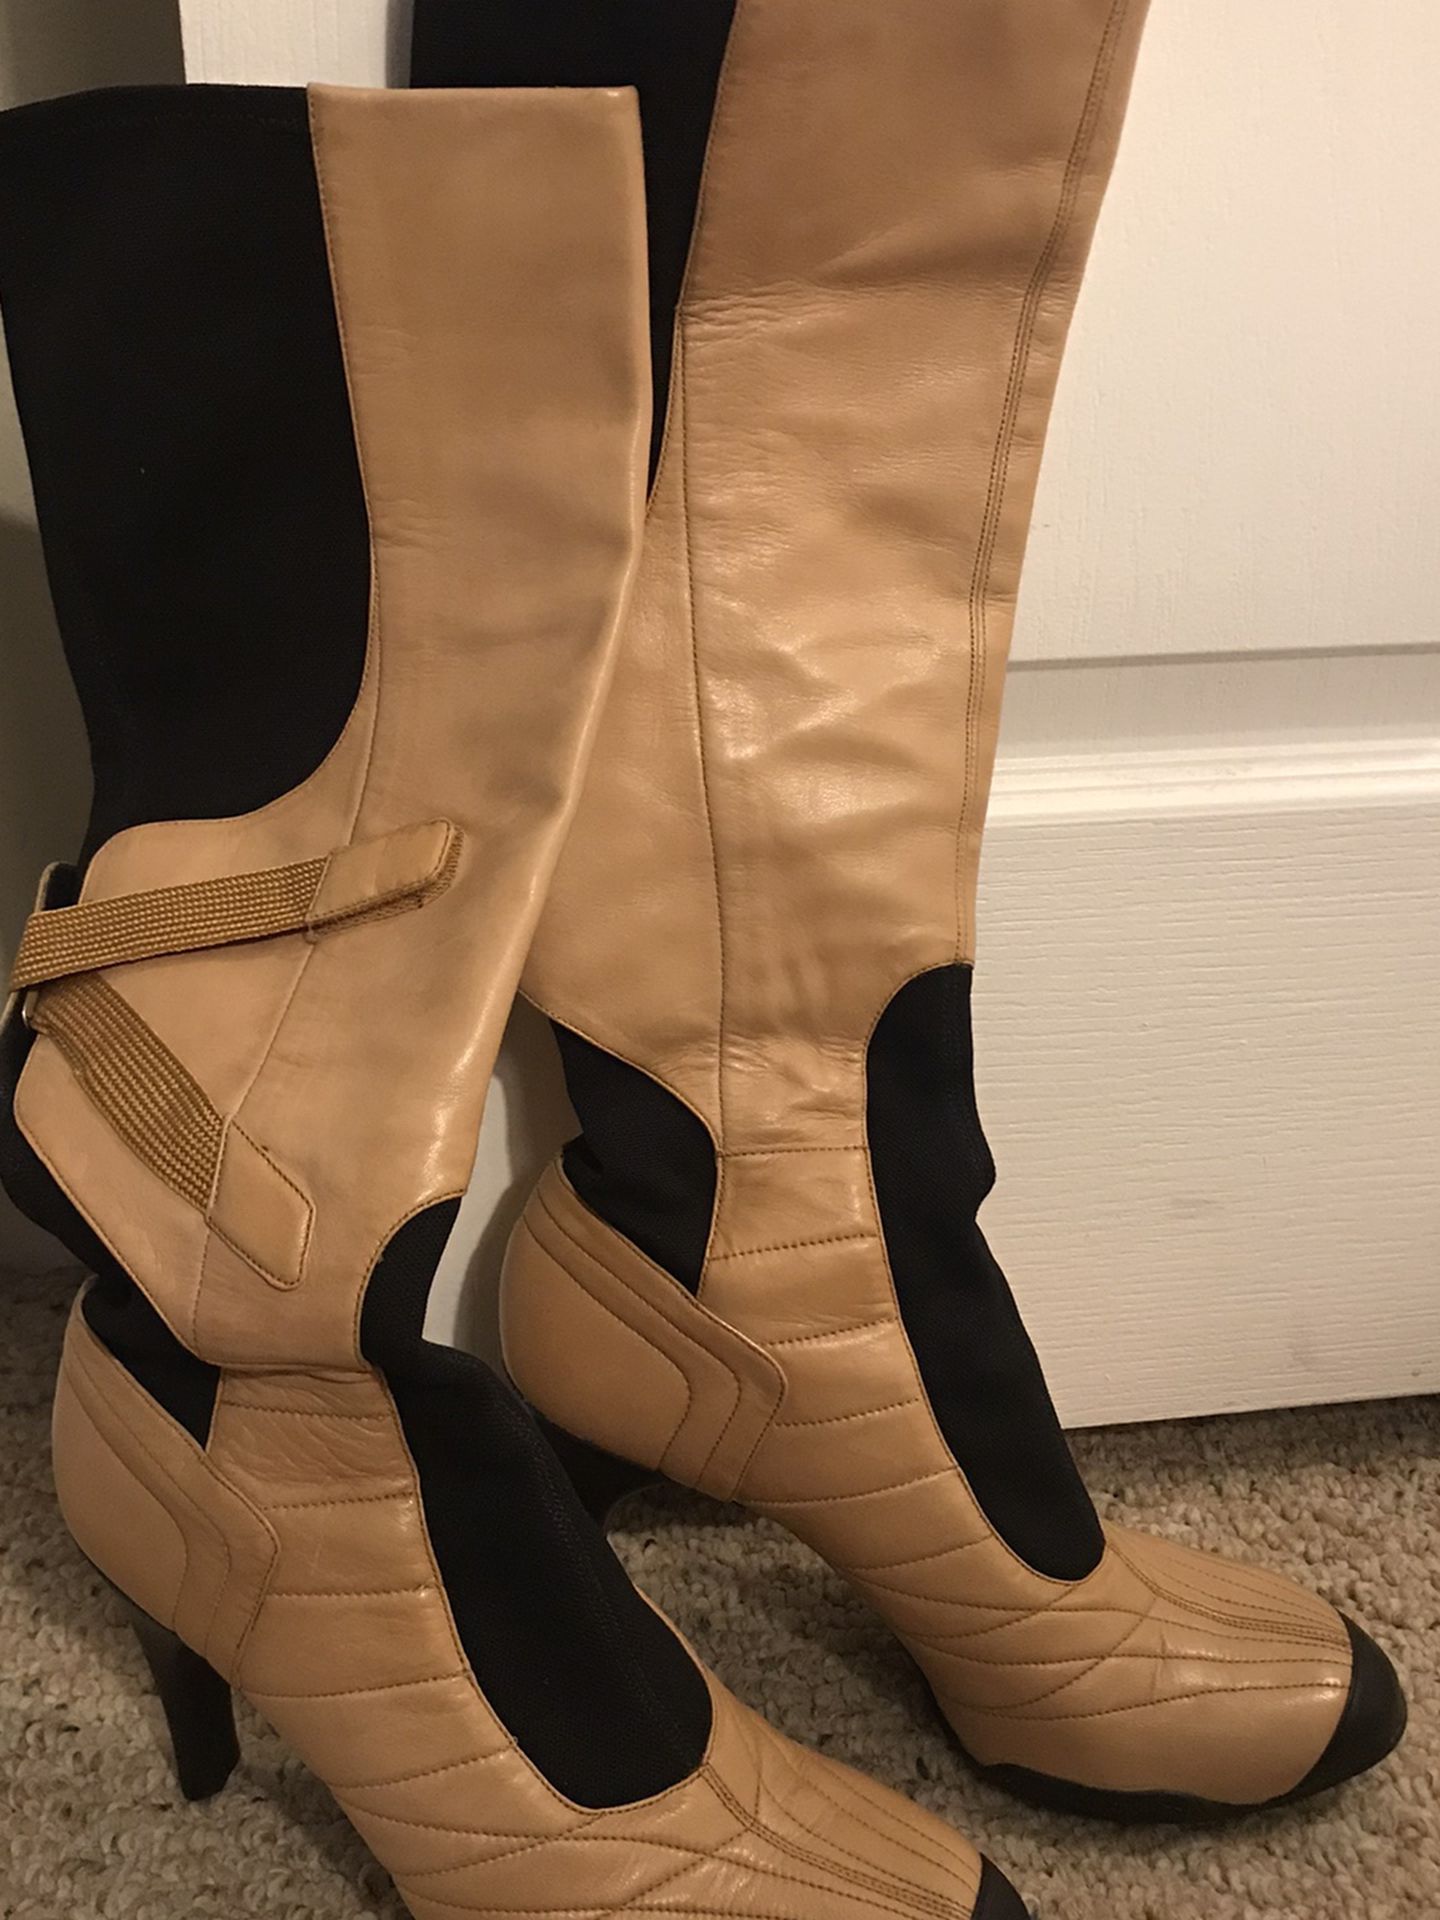 Nike x Hahn Leather Boots for Sale in - OfferUp